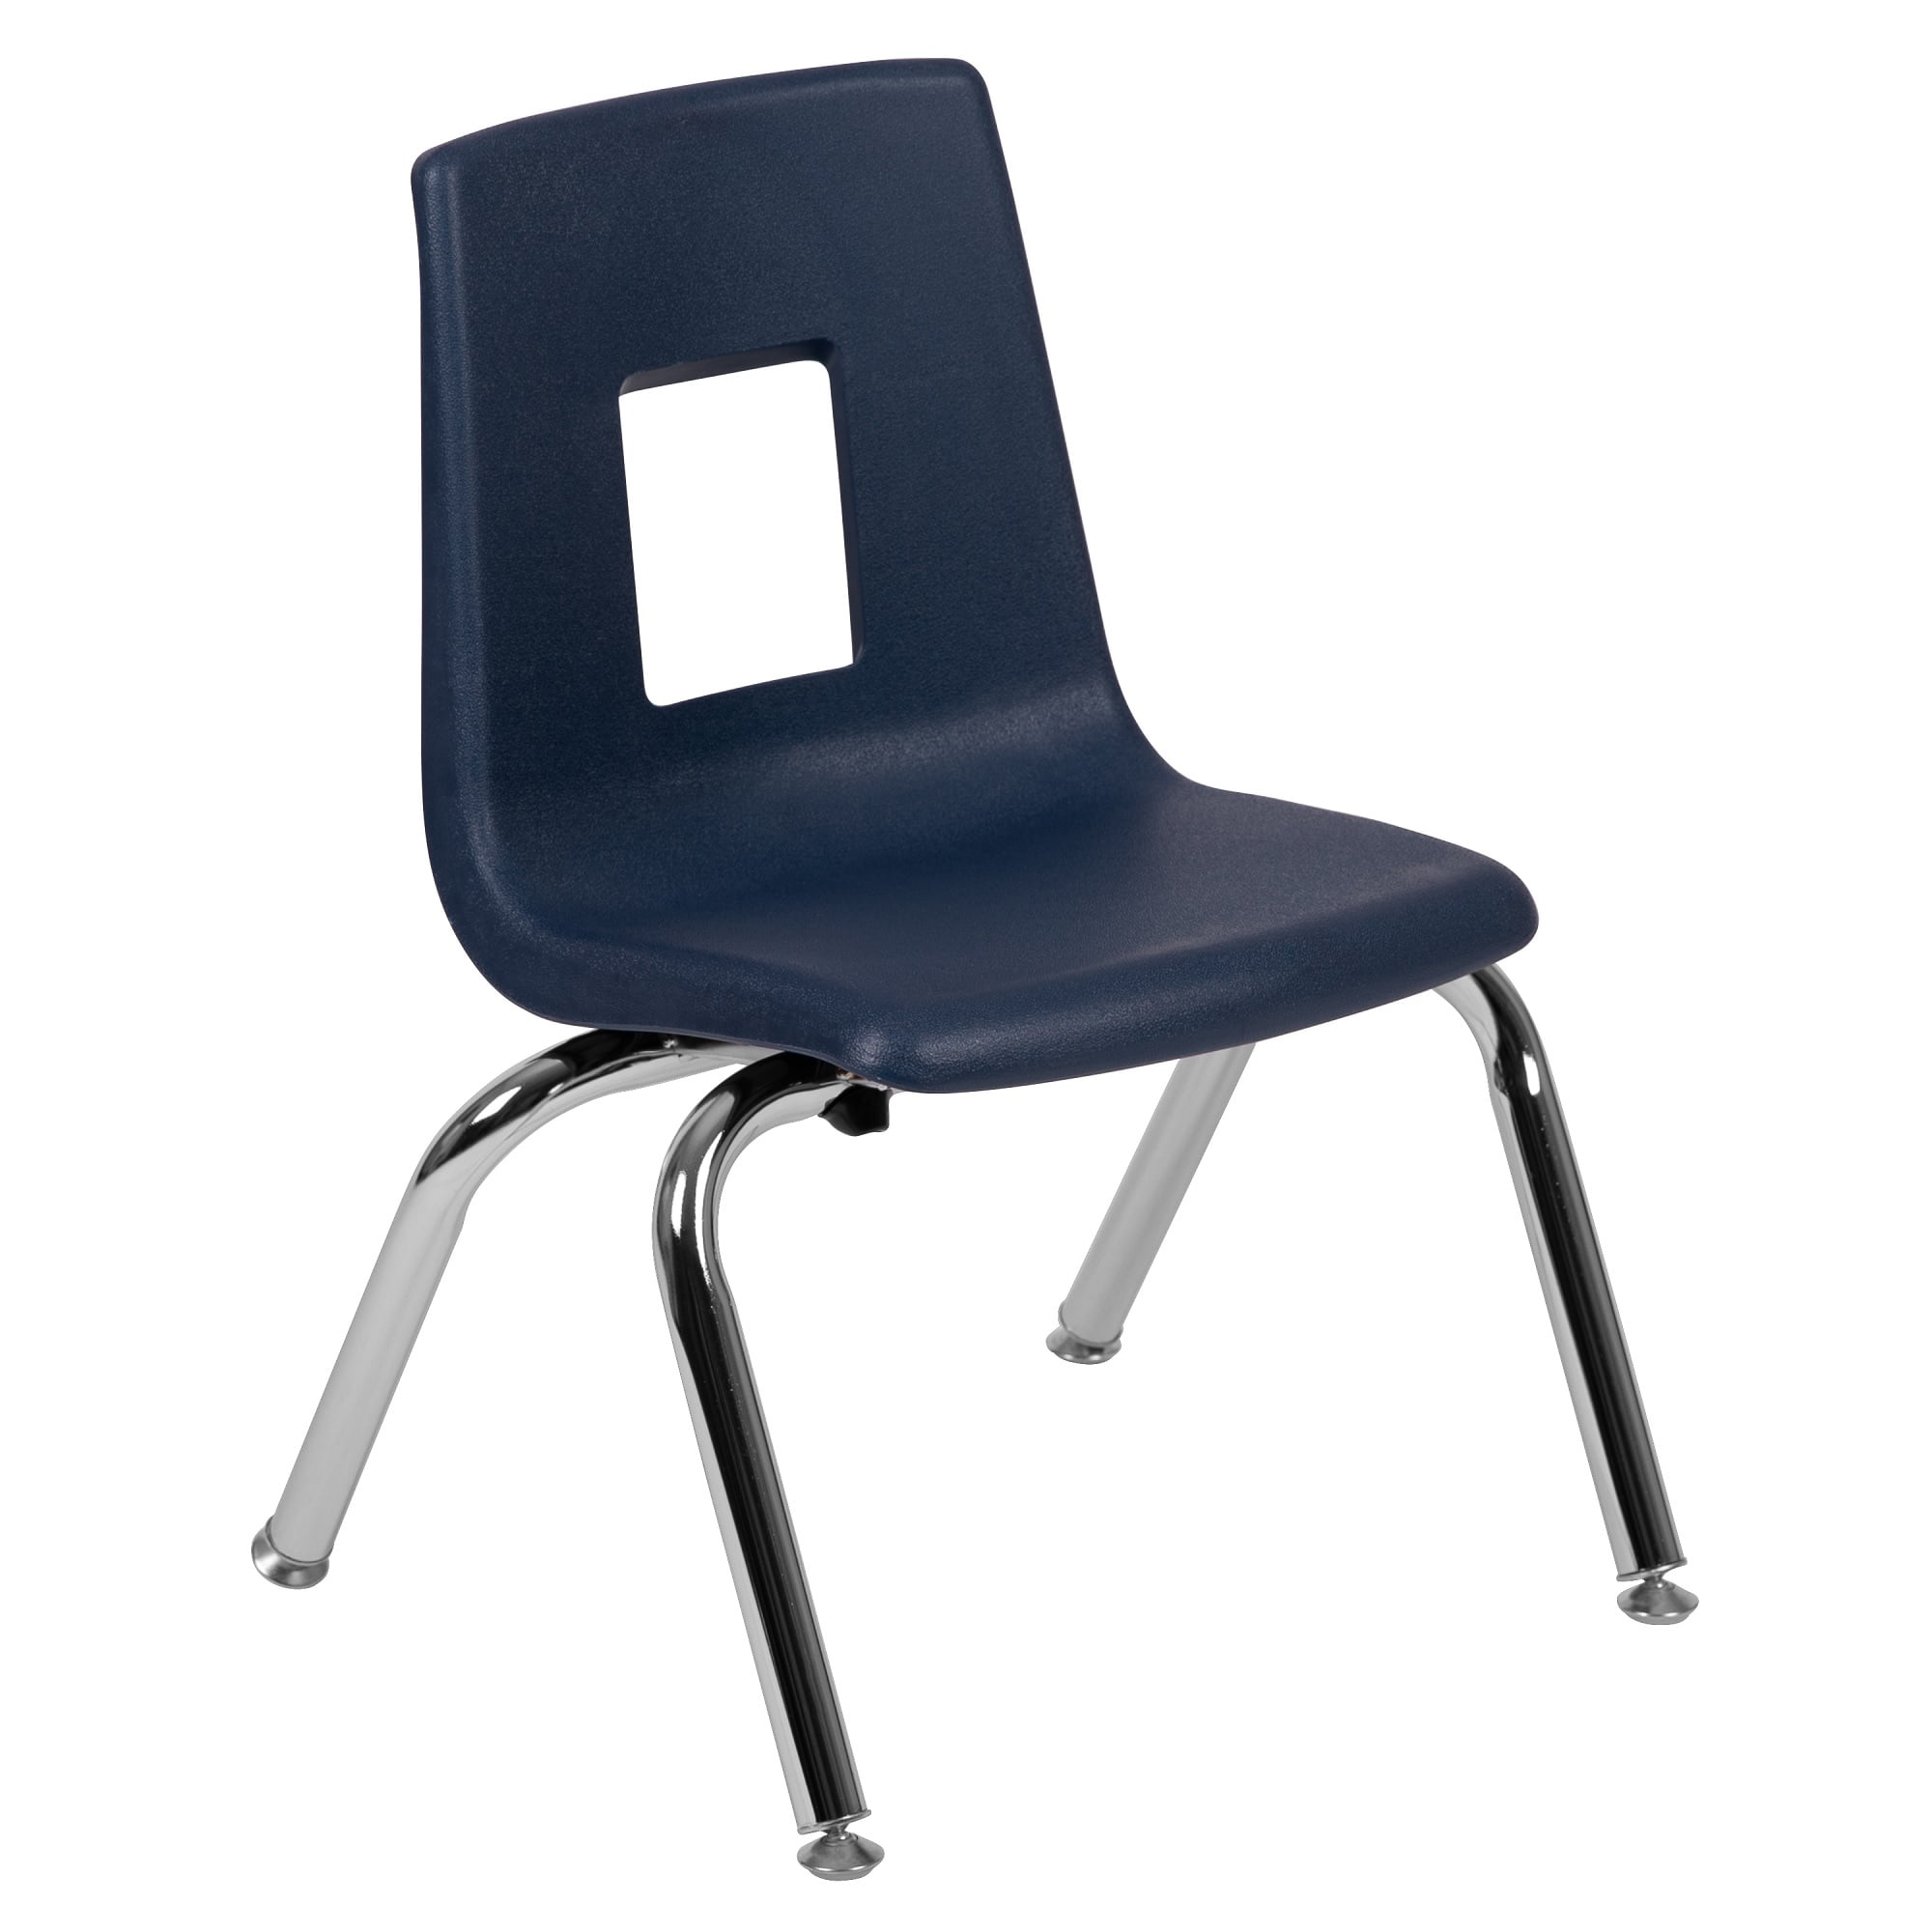 Lorell Classroom Student Stack Chairs Set of 4 Navy/Silver 18H Seat